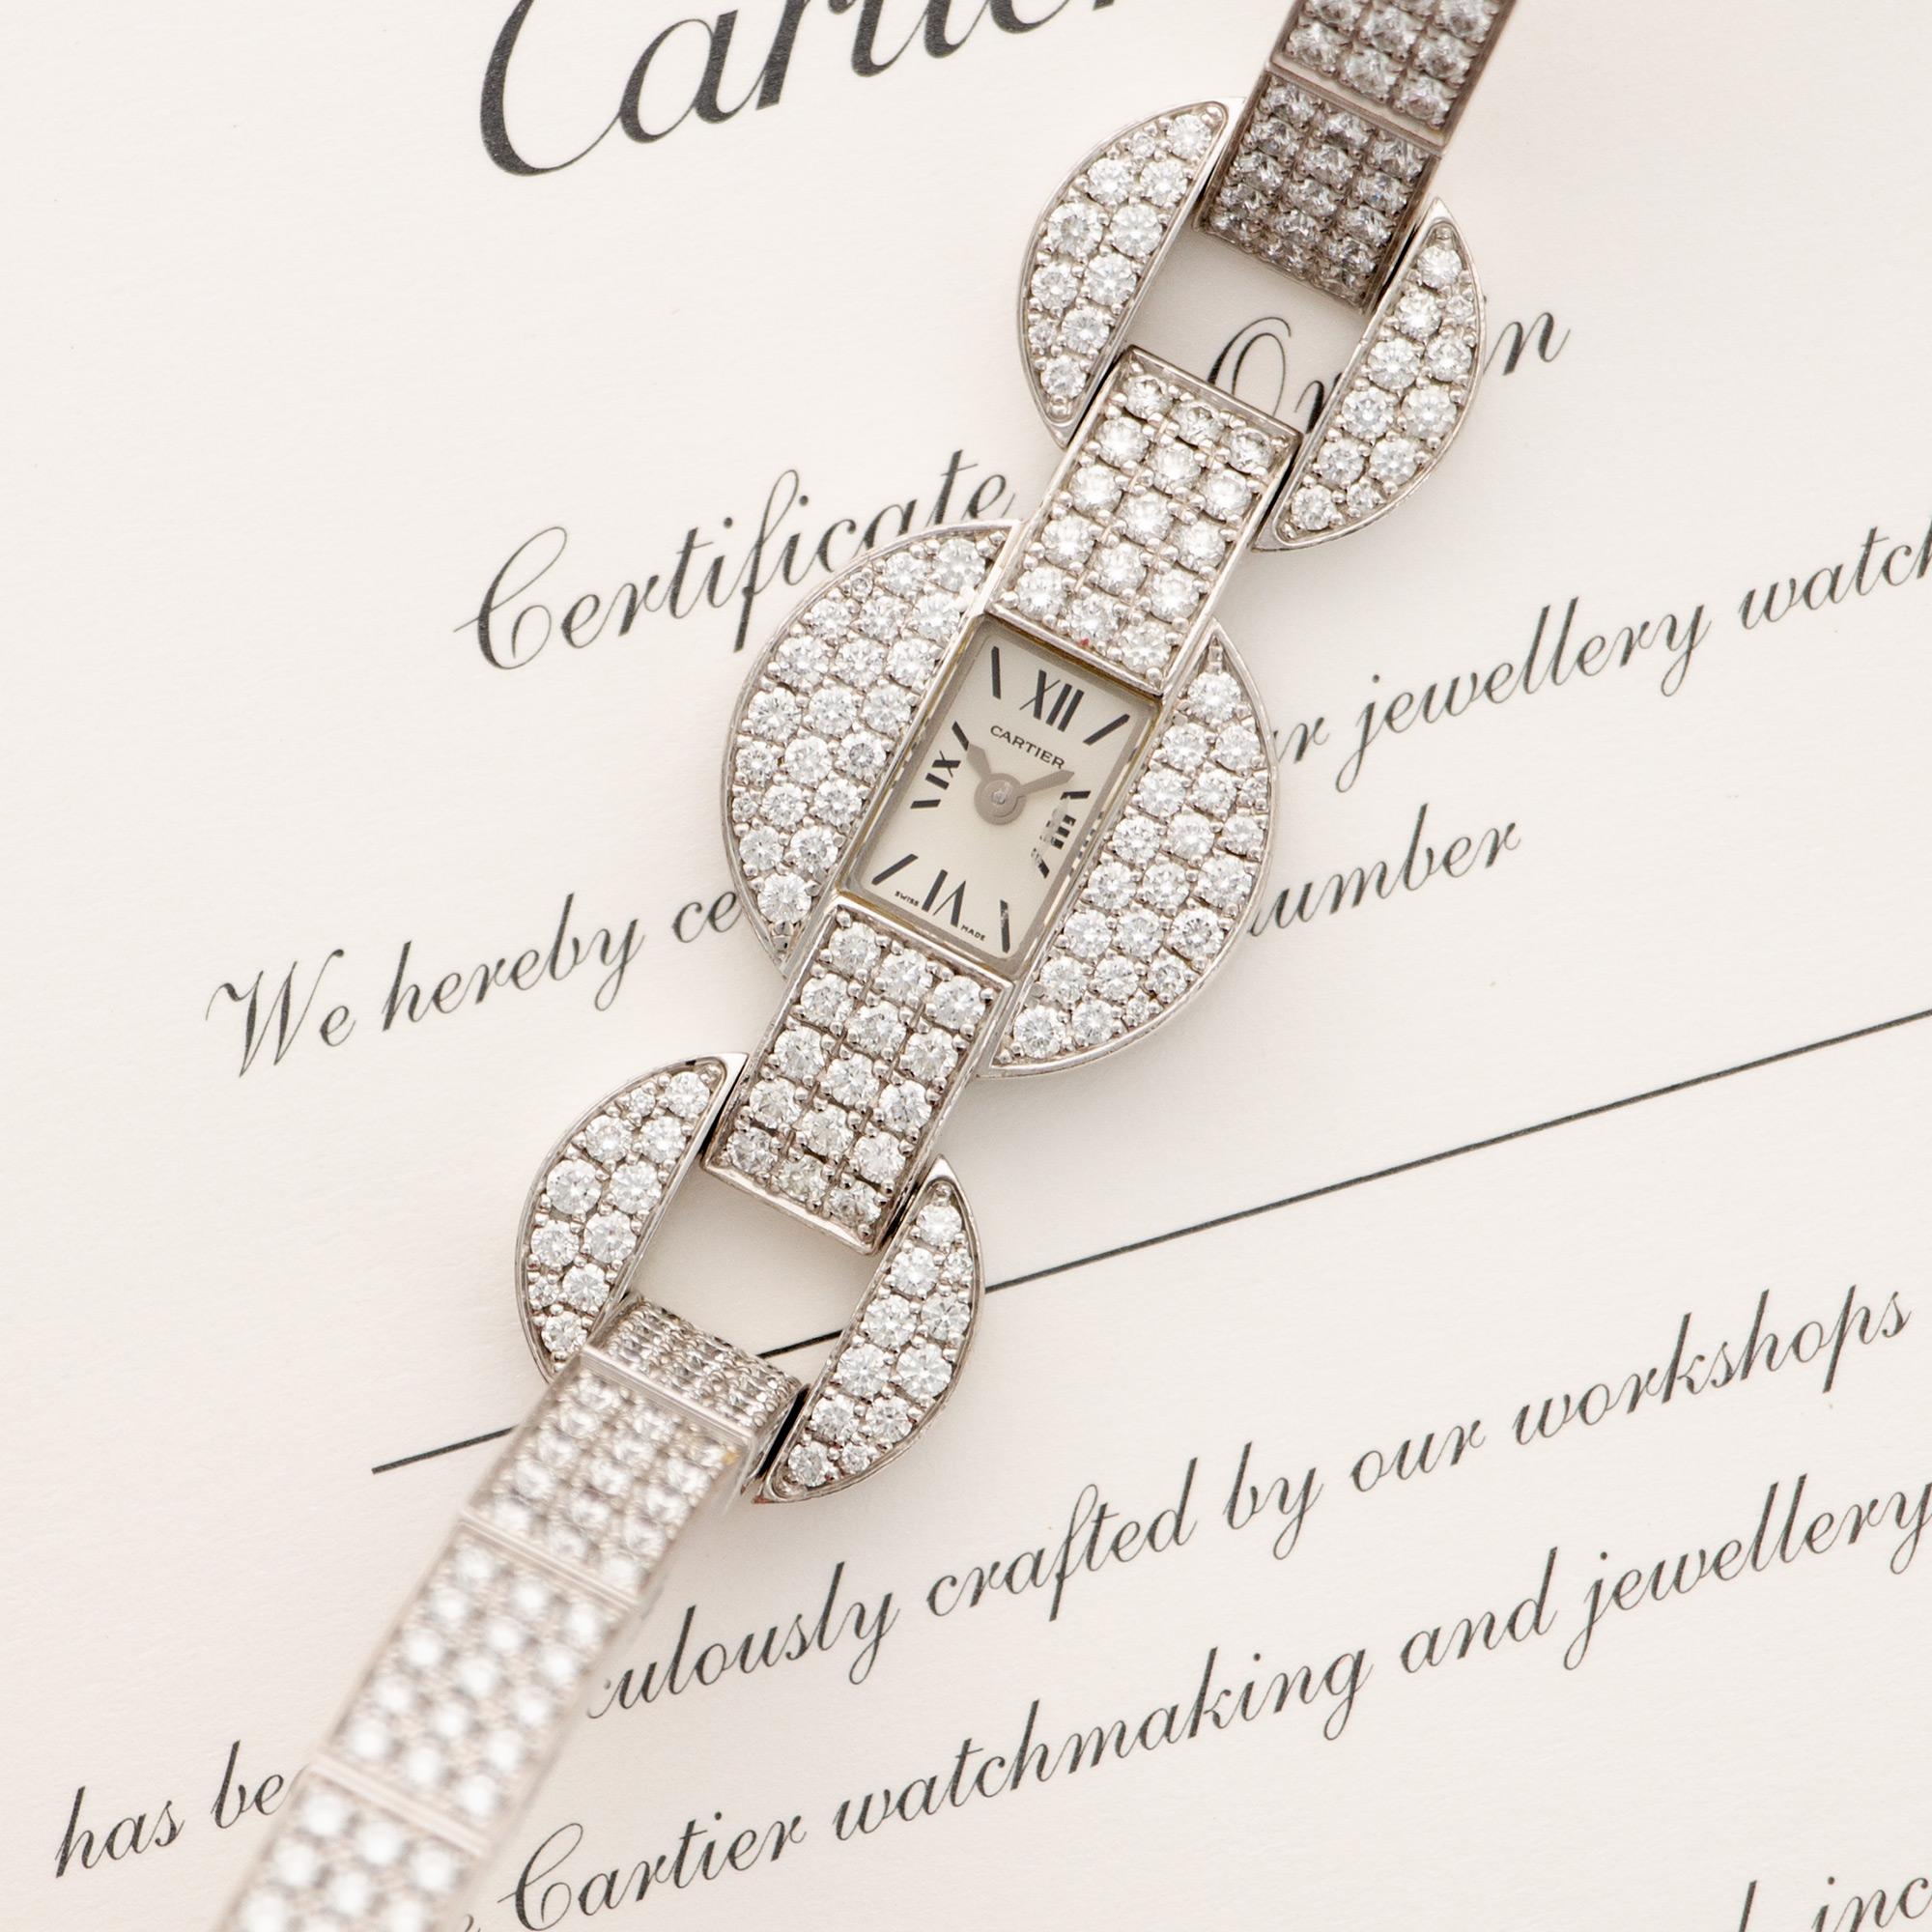 An 18k White Gold Cartier wristwatch from the 